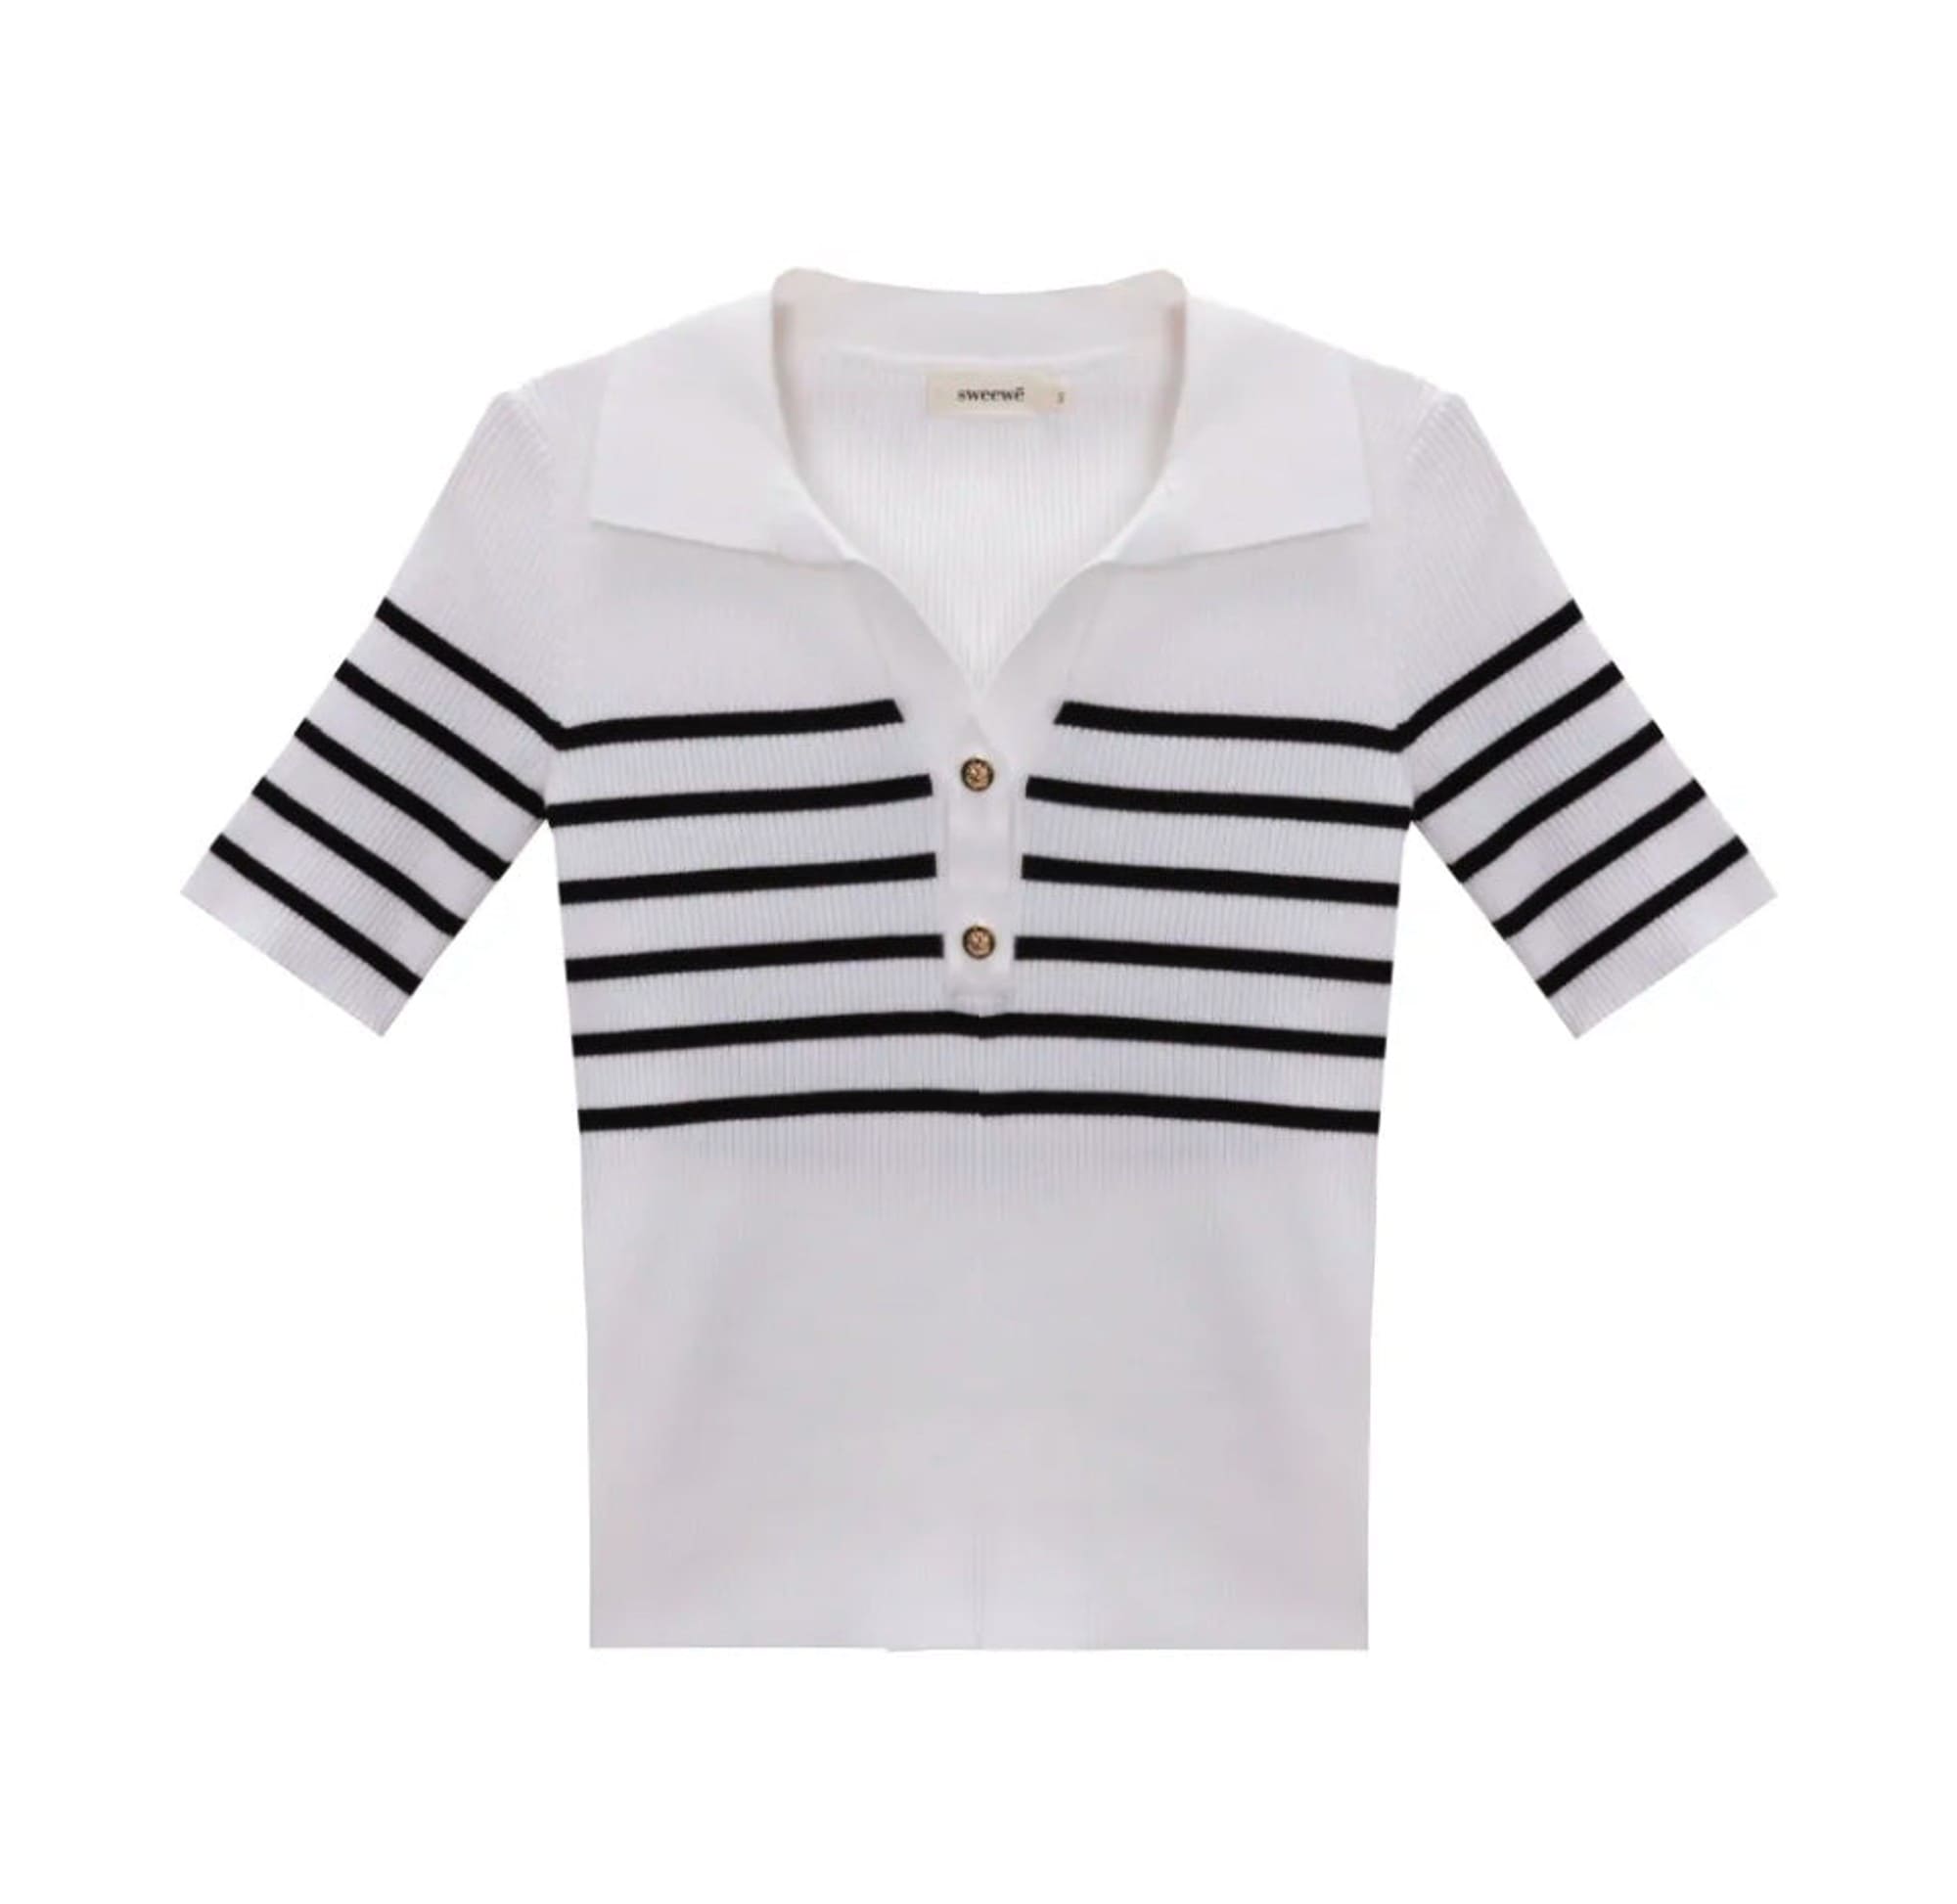 Sweewe French Polo Knit in White